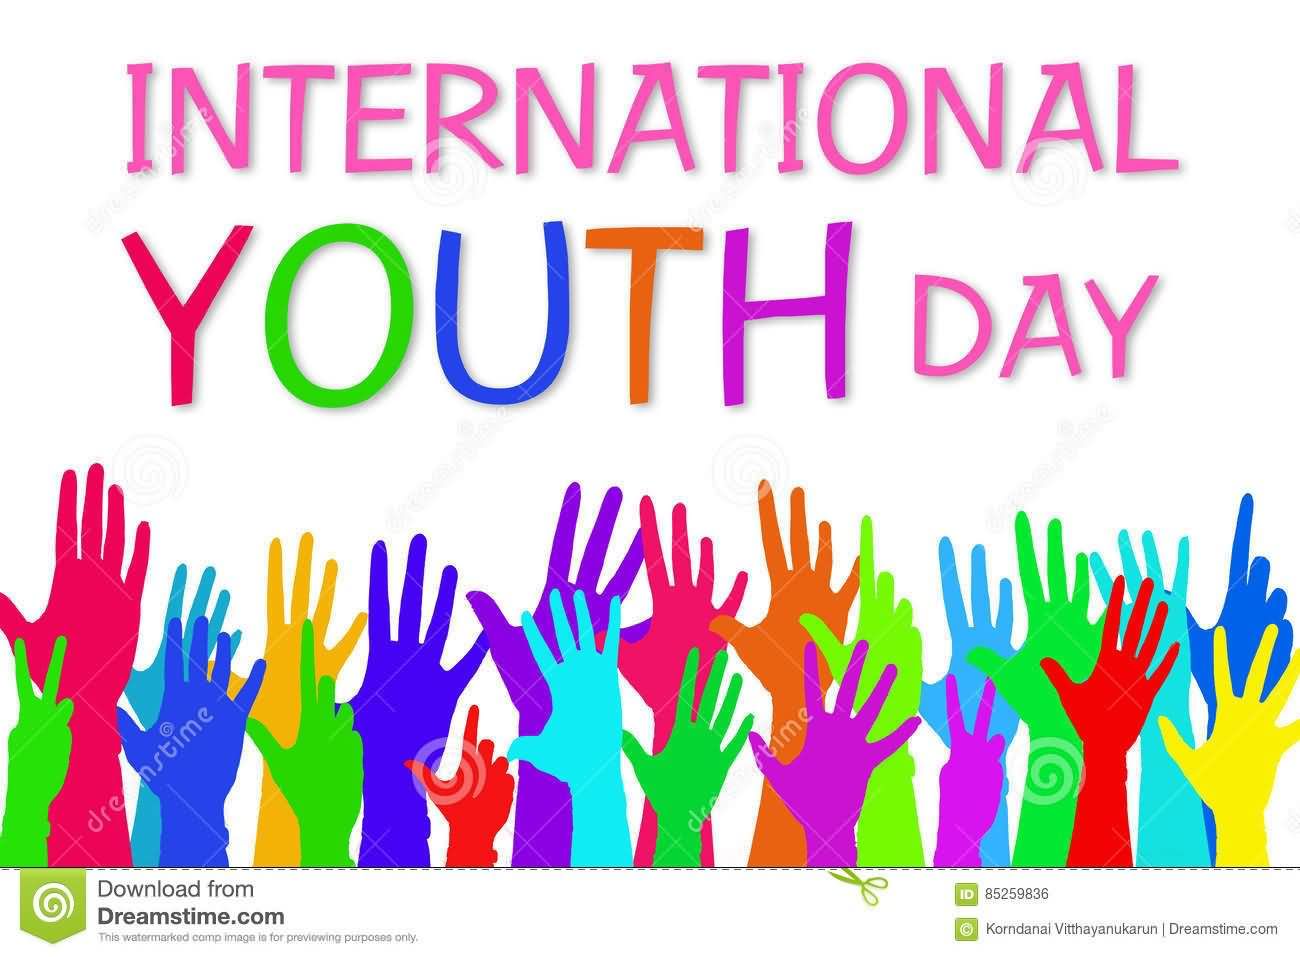 International Youth Day Colorful Hands Up Illustration